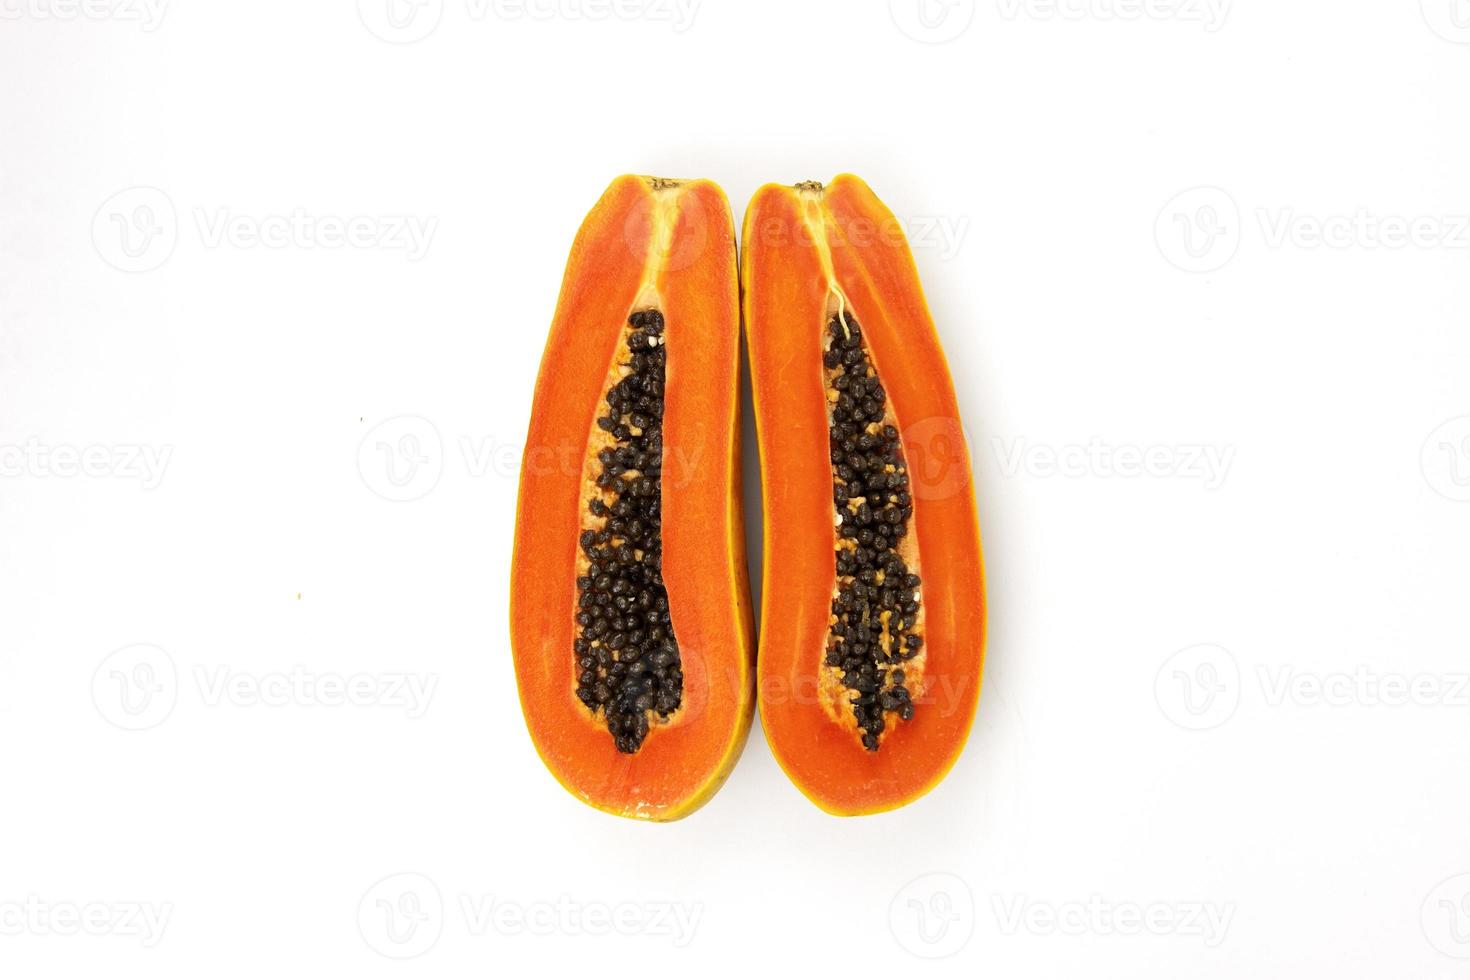 TWO pieces of Papaya isolated on white background, Fresh delicious papaya in center of white background, top view concept for diet cooking photo